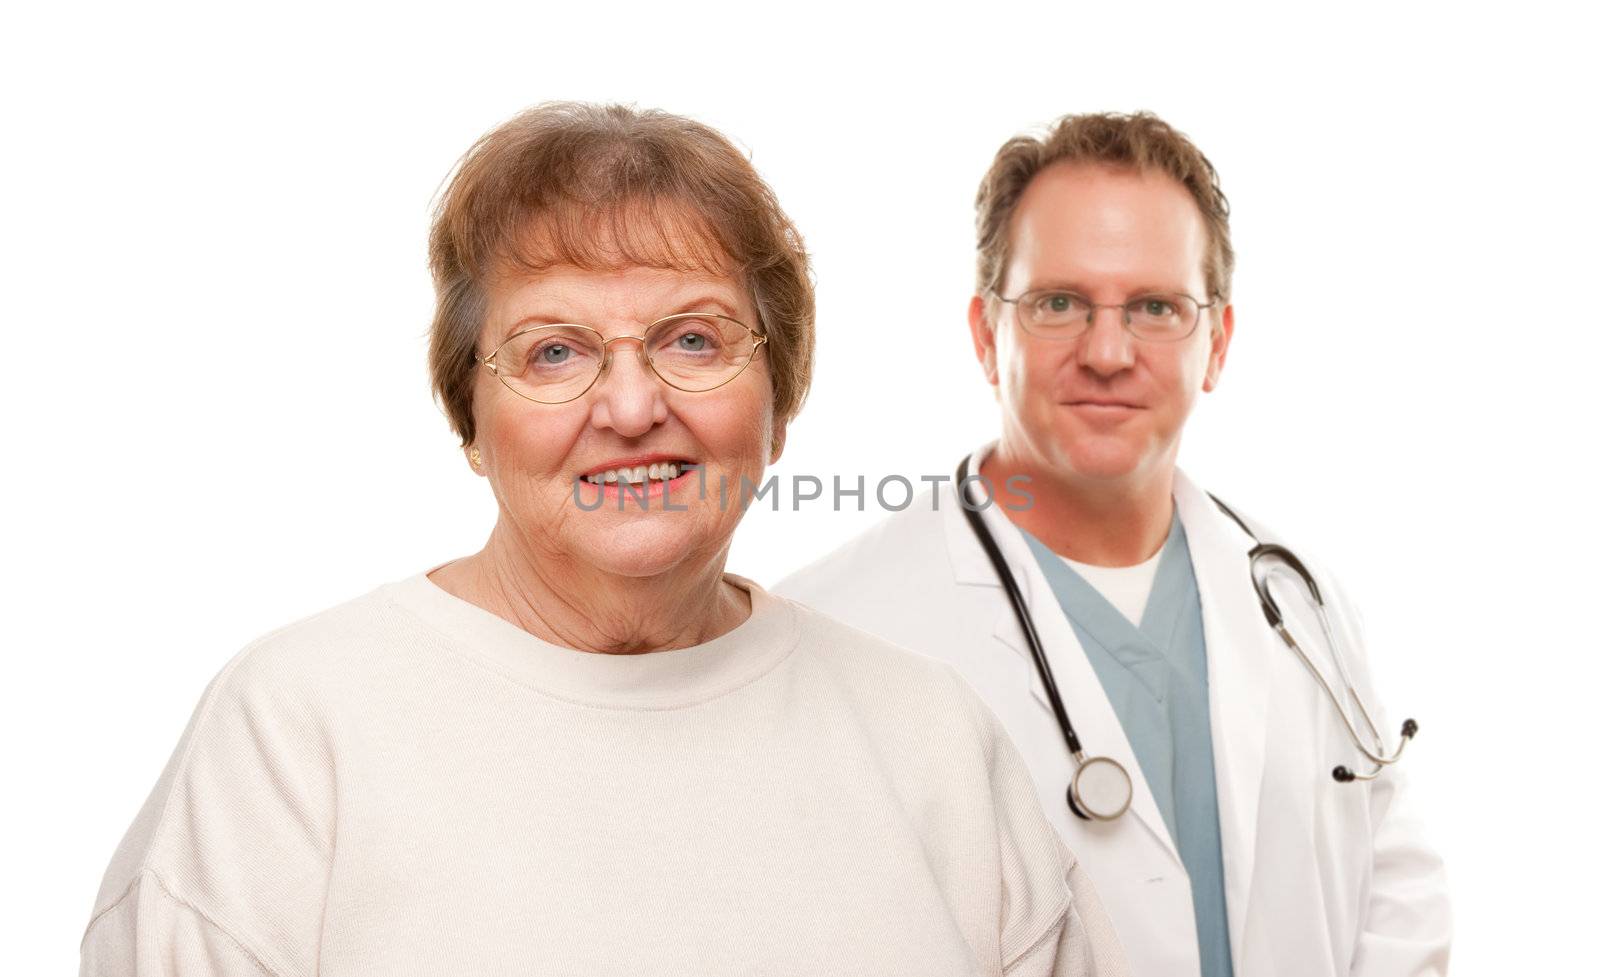 Smiling Senior Woman with Male Doctor Behind Isolated on a White Background.